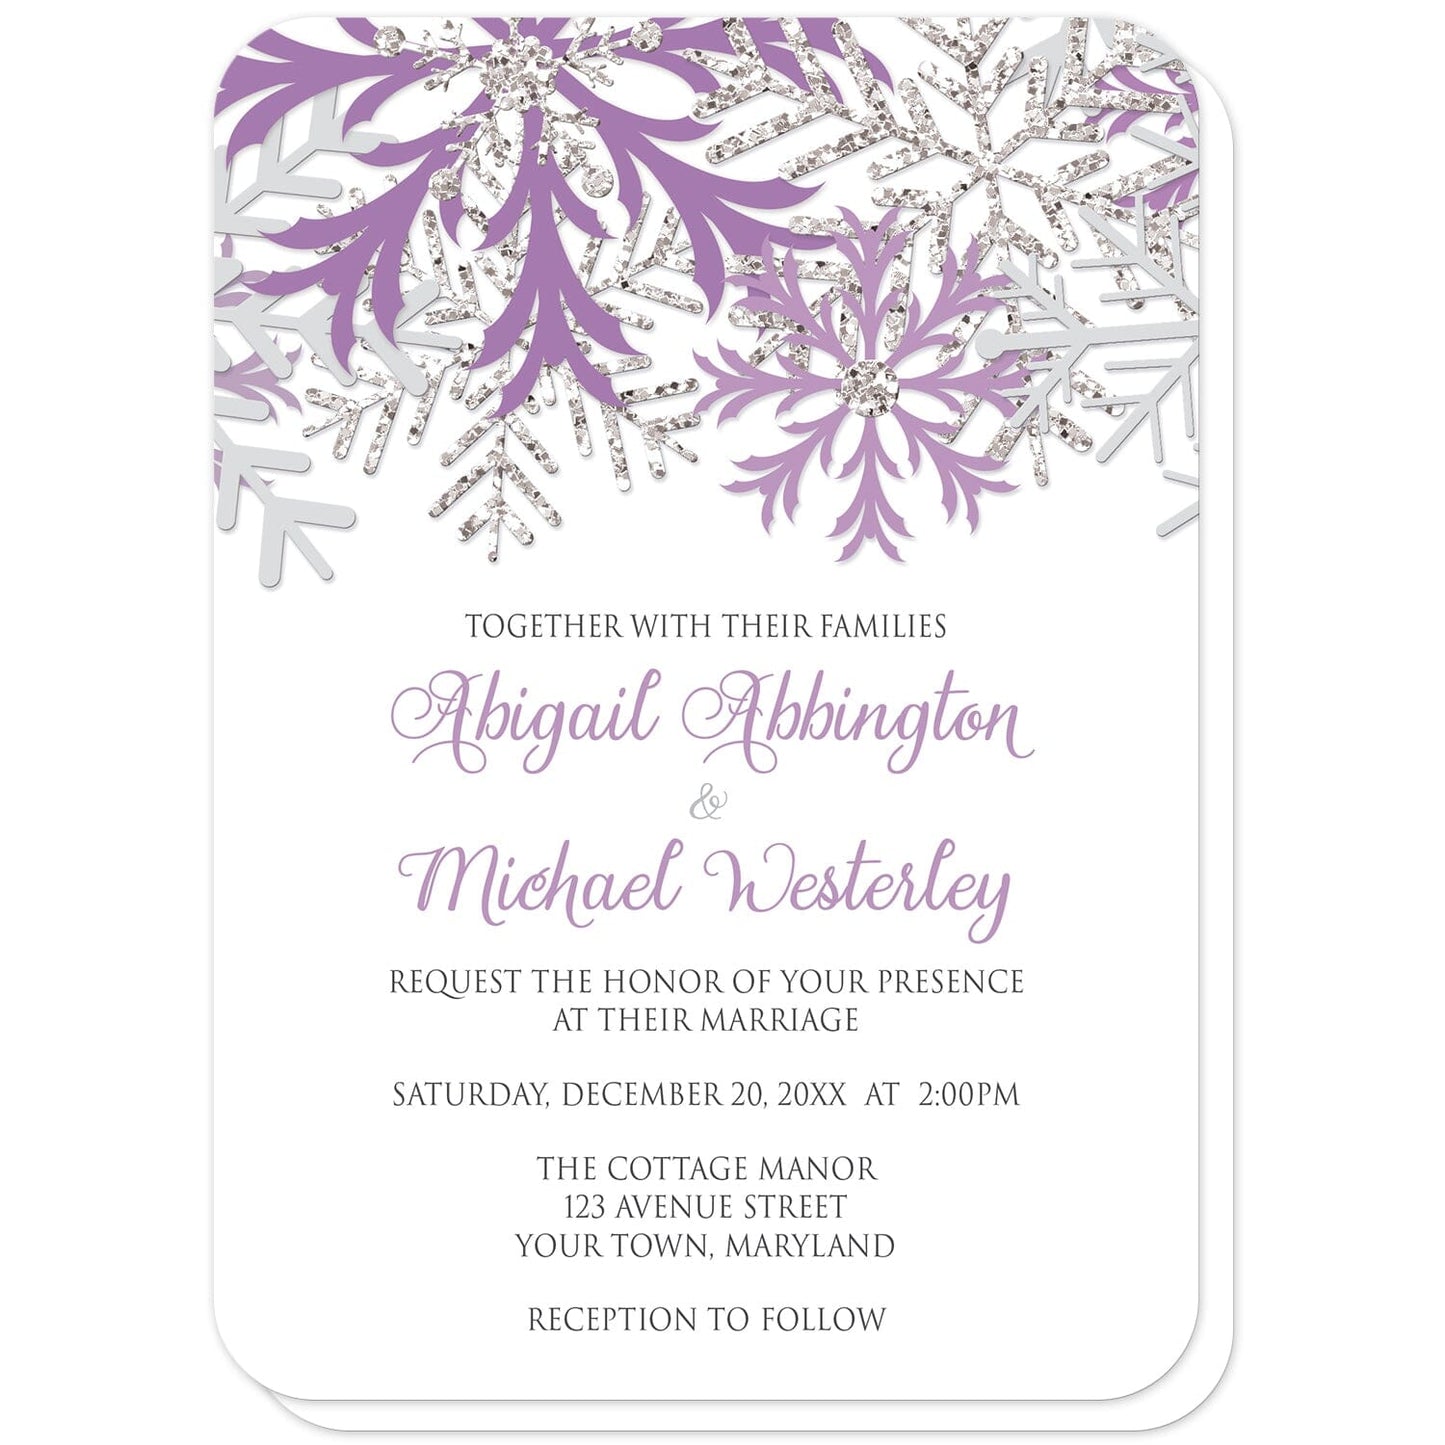 Winter Purple Silver Snowflake Wedding Invitations (with rounded corners) at Artistically Invited. Beautiful winter purple silver snowflake wedding invitations designed with purple, light purple, silver-colored glitter-illustrated, and light gray snowflakes along the top over a white background. Your personalized marriage celebration details are custom printed in purple and gray below the pretty snowflakes.